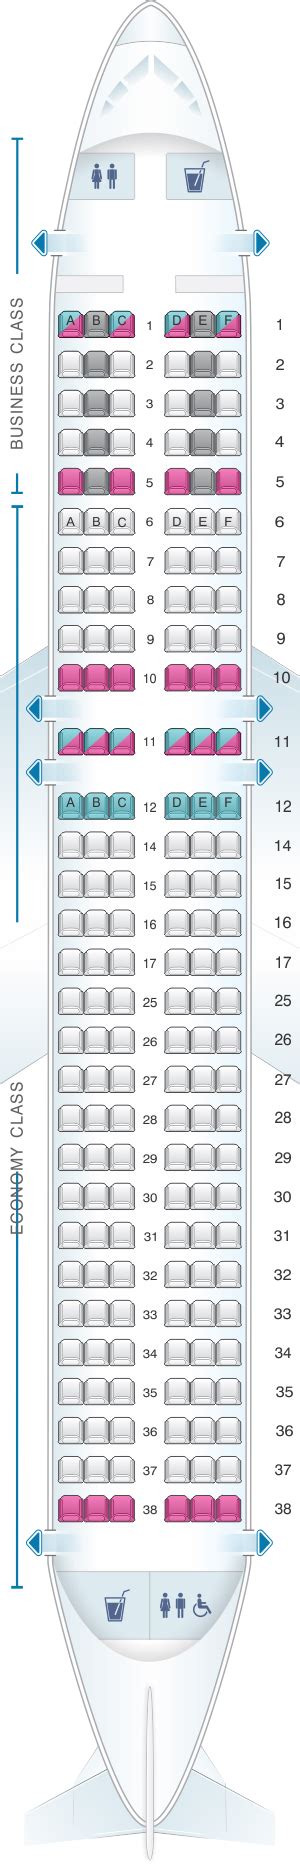 United Airlines Seat Map Airbus A320 Awesome Home